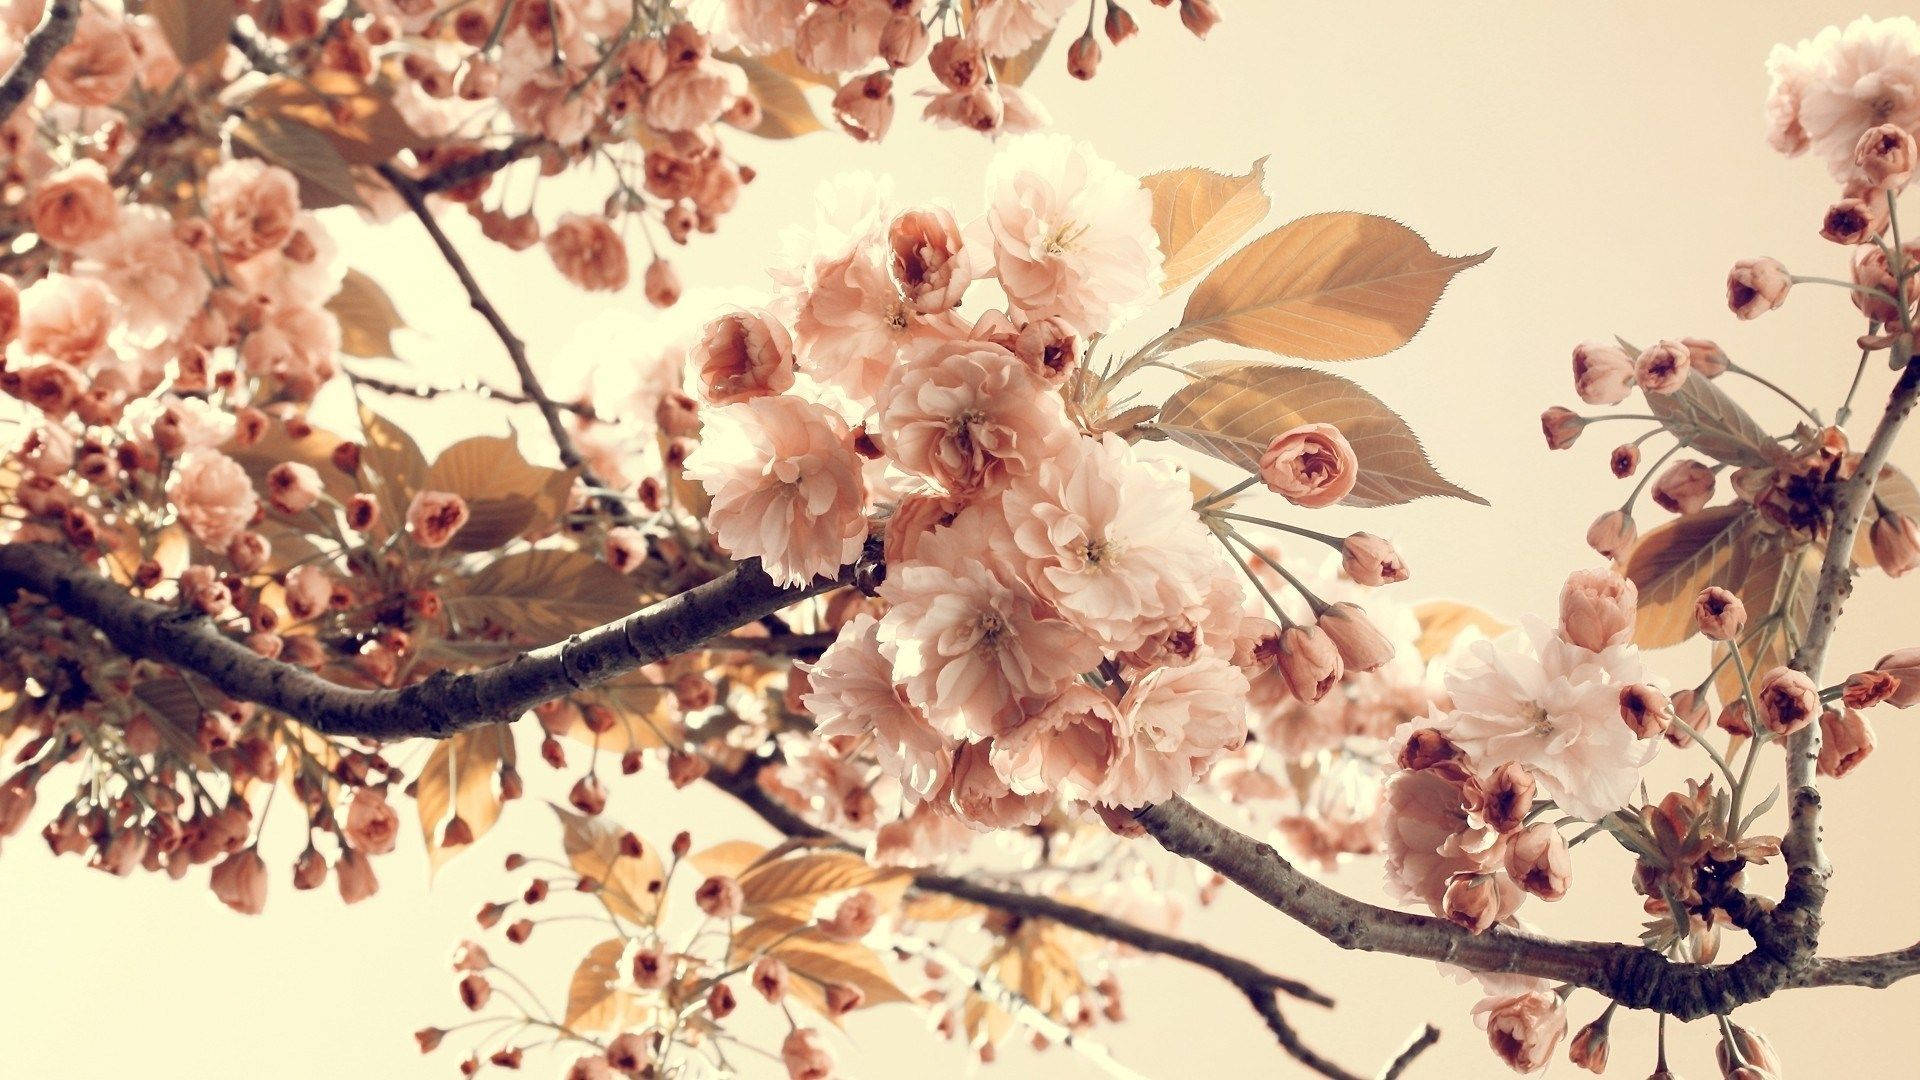 Download Branch Of Flowers Vintage Aesthetic Laptop Wallpaper | Wallpapers .com